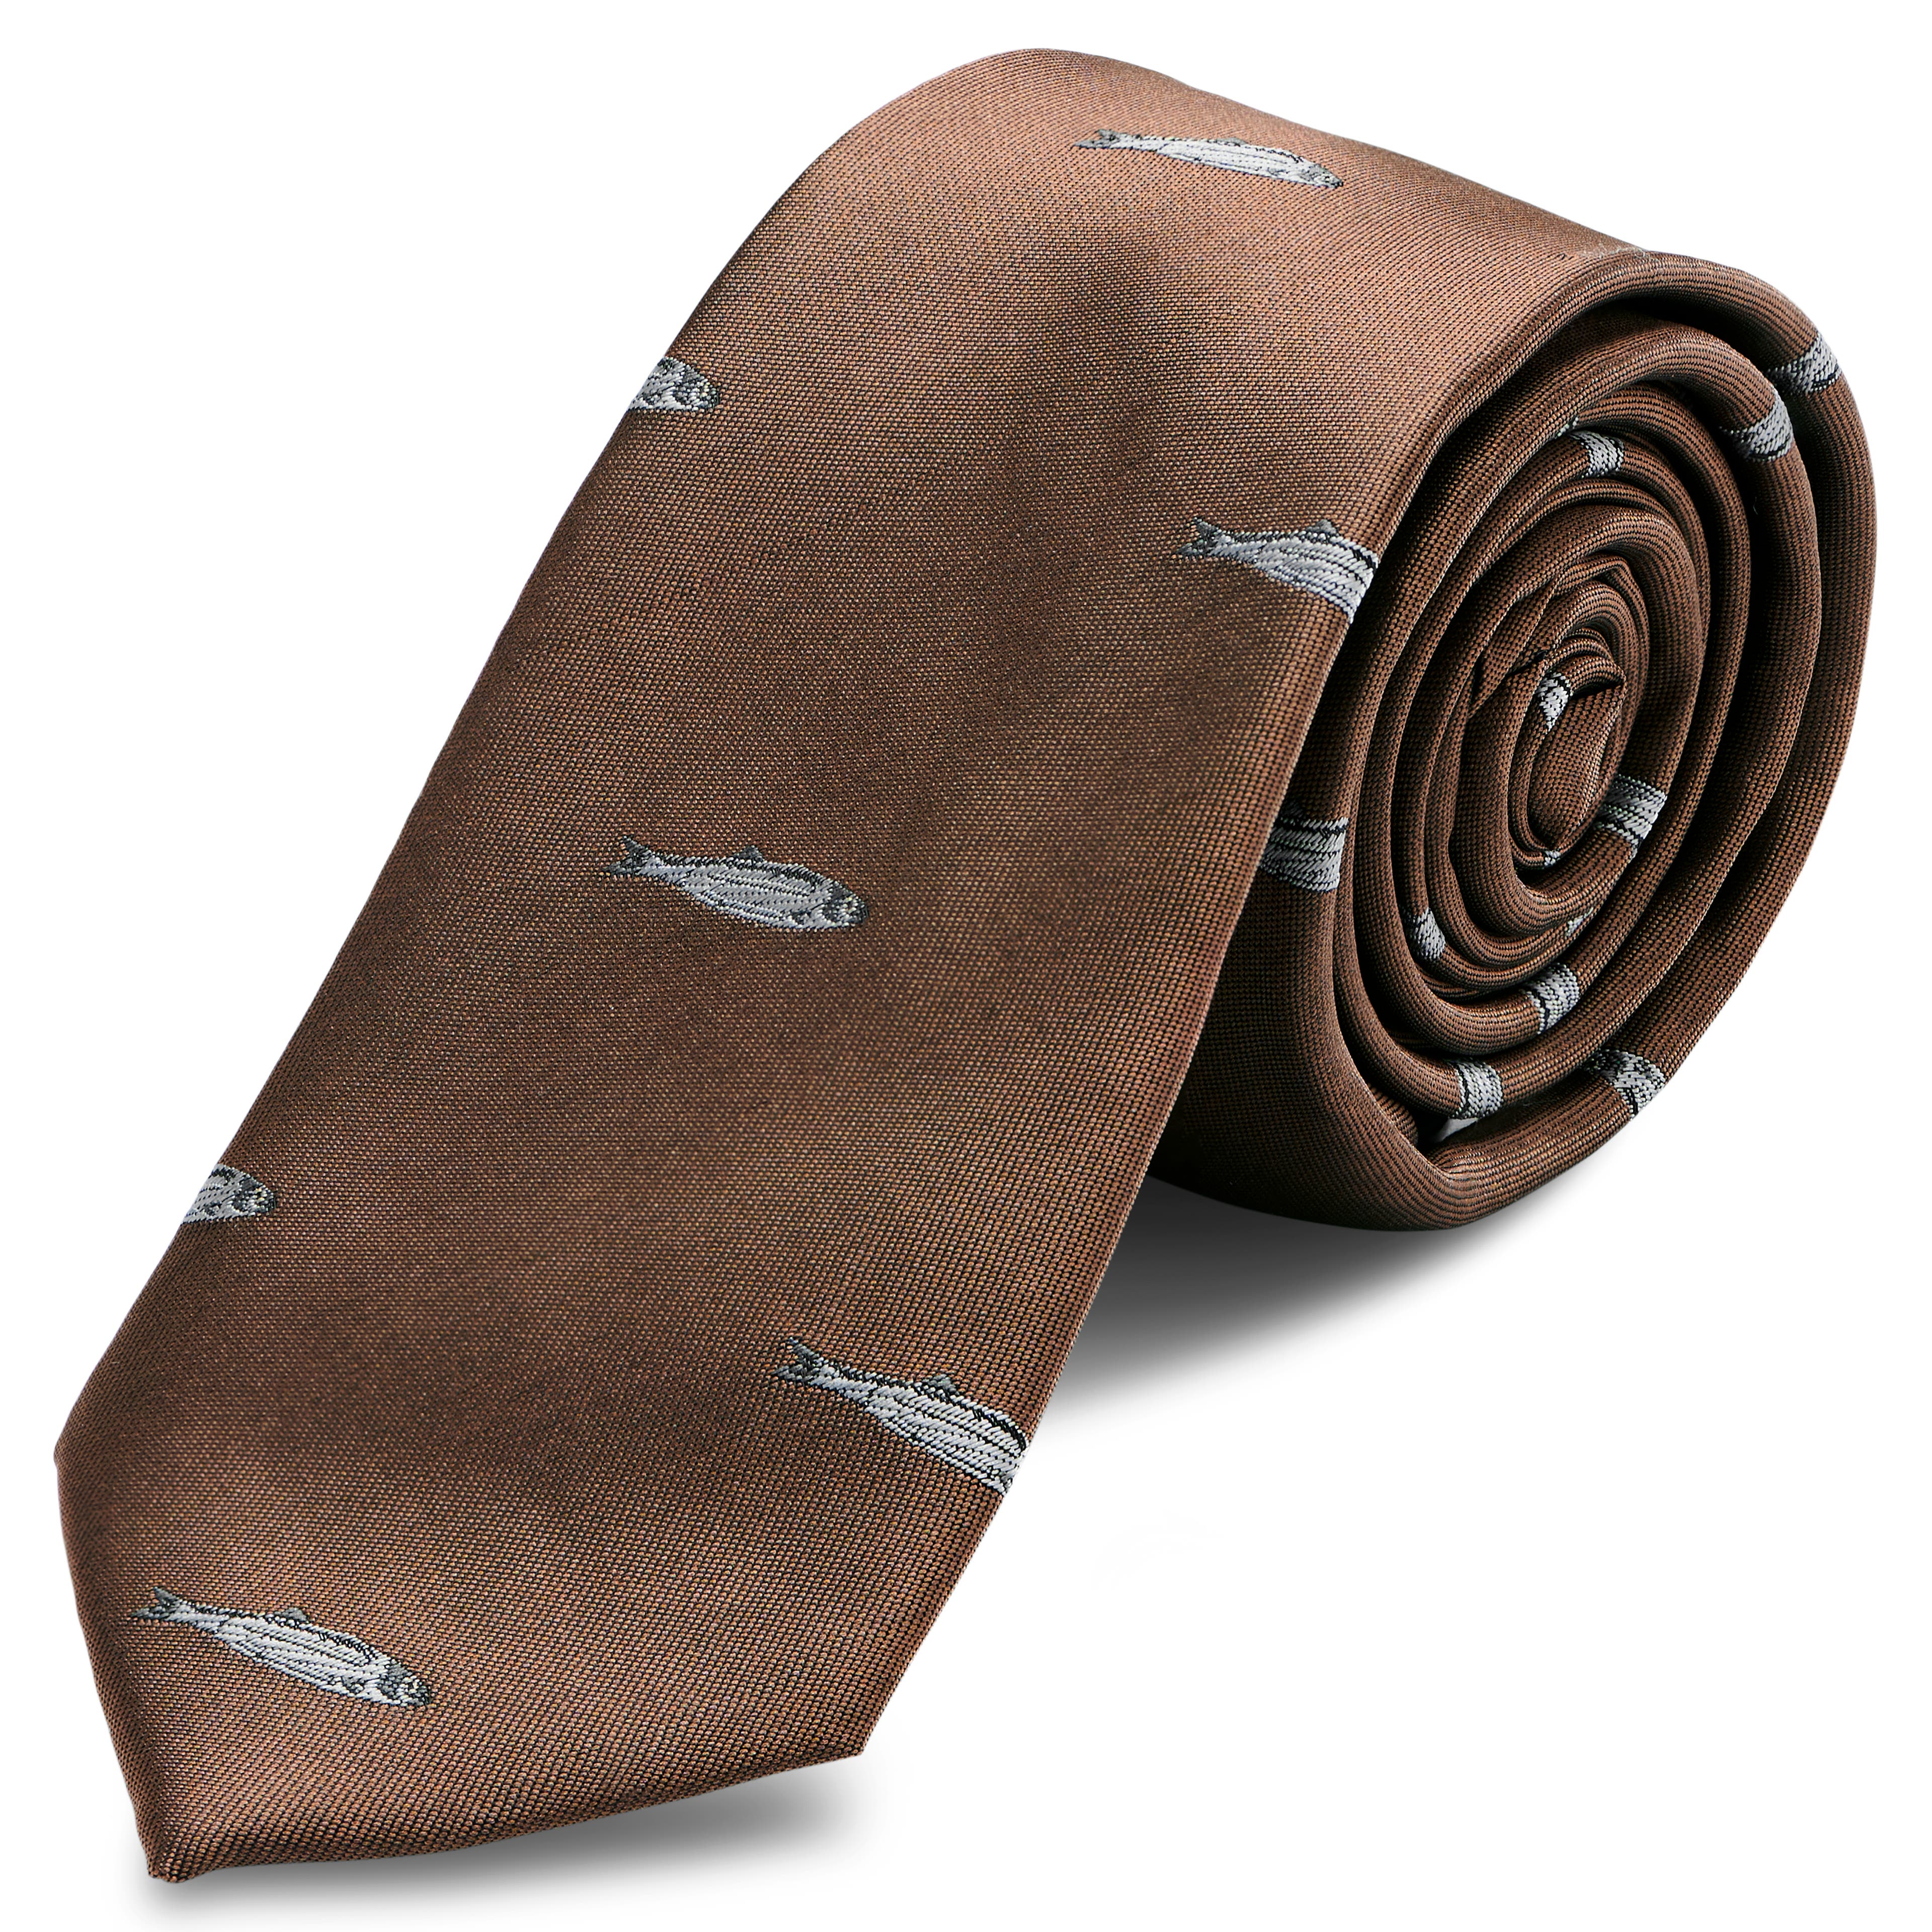 Brown Skinny Tie with Fish